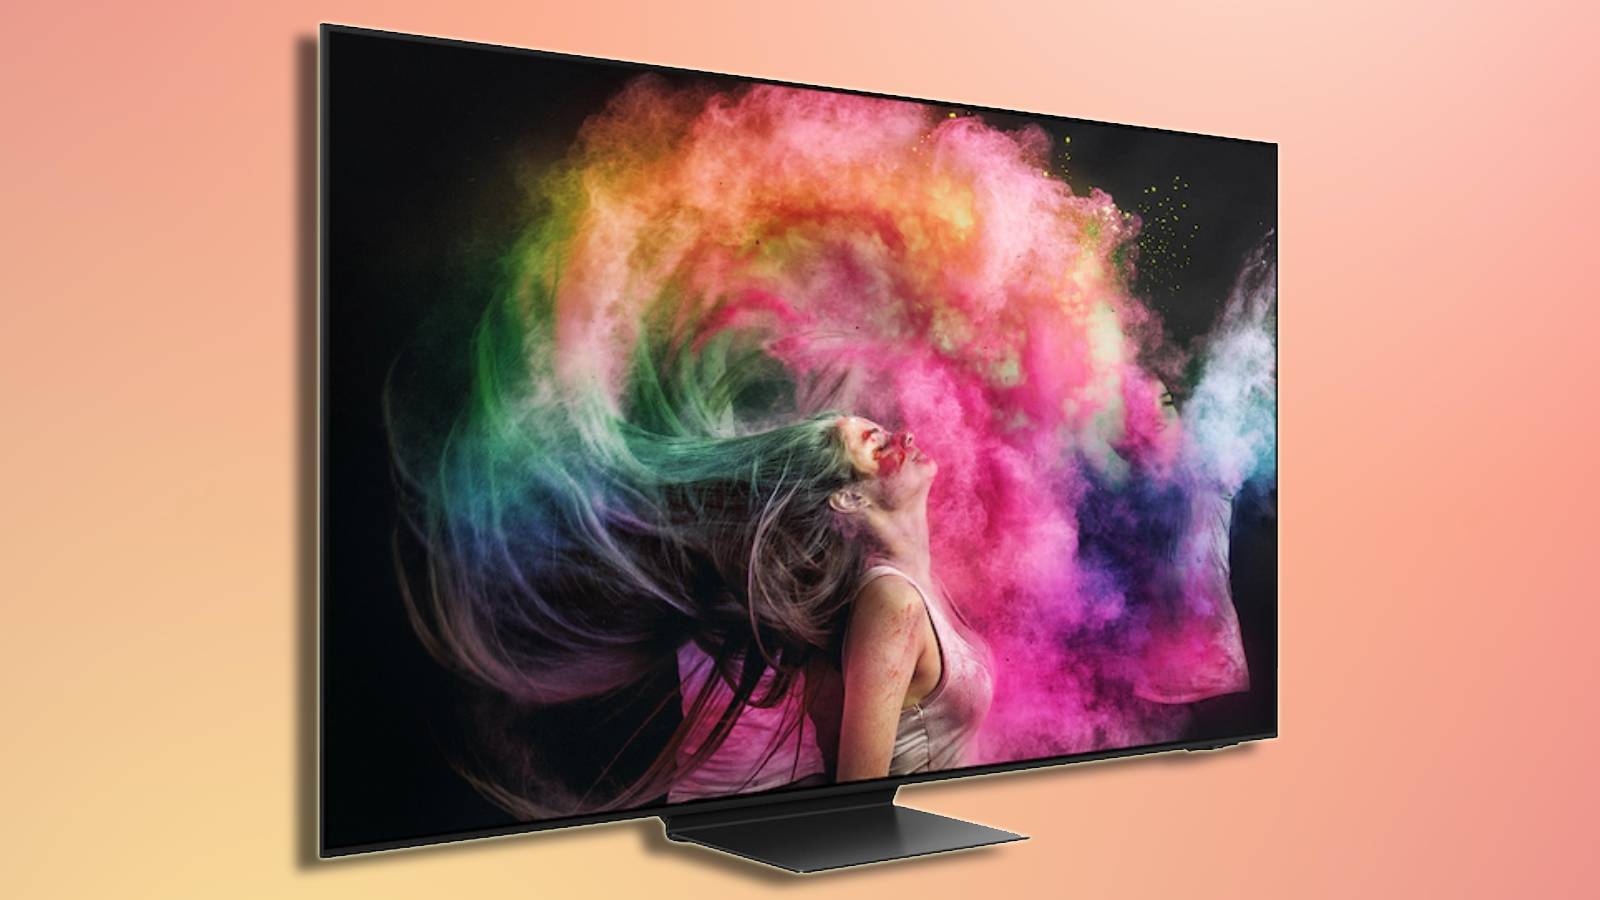 Exclusive Offer: Samsung’s 65-inch OLED TV Now at an Unbeatable 00 Discount, Plus Freebie!